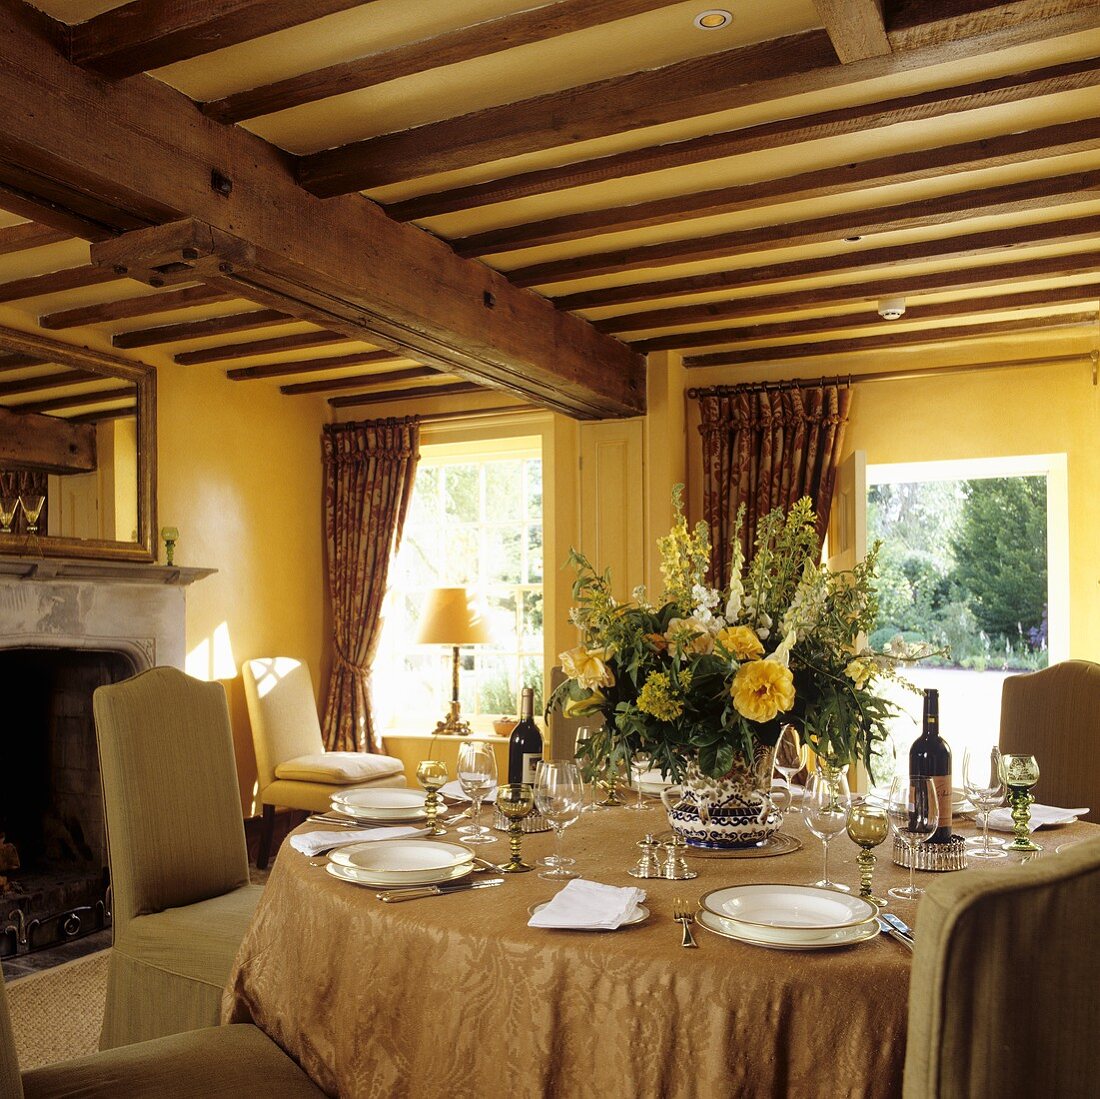 A table laid in a room with a wood beam ceiling in a yellow-painted living room in a country house